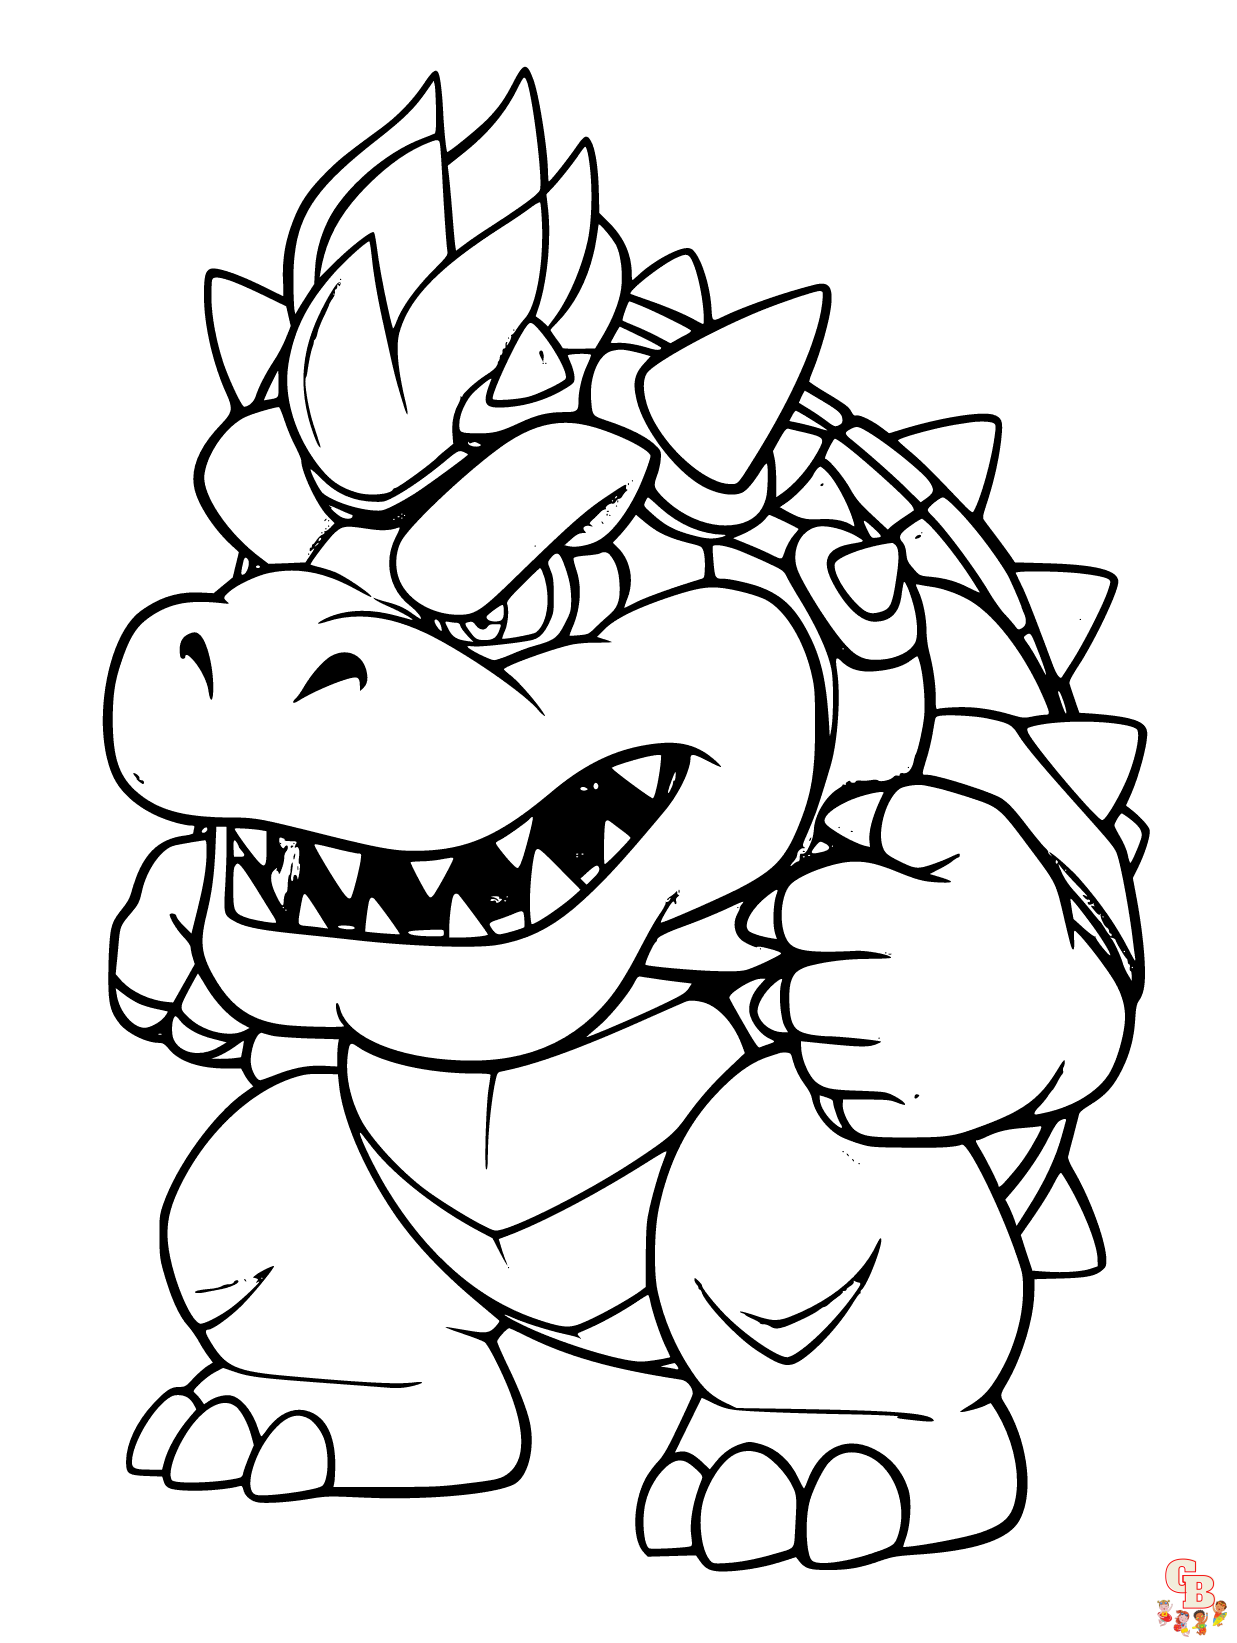 Bowser coloring pages free